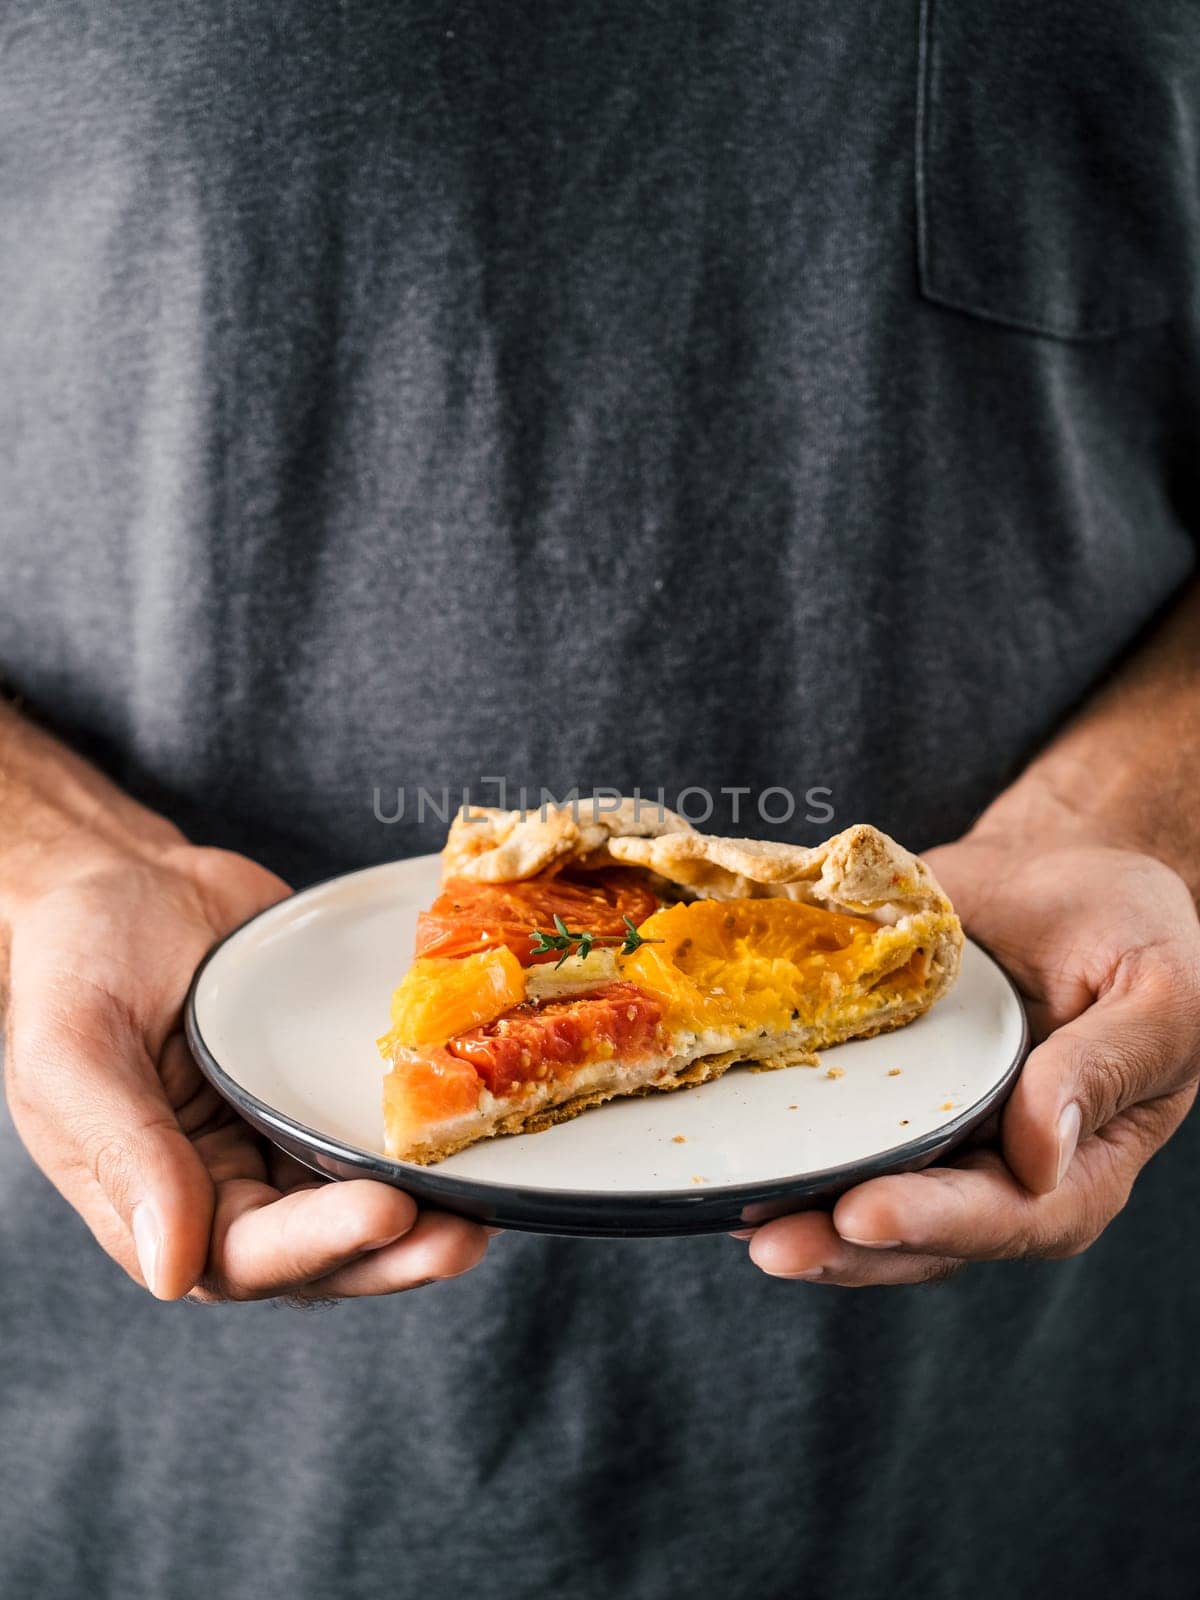 Hands takes plate with portion piece of pie. Savory fresh homemade tomato tart or galette. Healthy appetiezer - whole wheat or rye-wheat pie with tomatoes,cheese. Vertical. Copy space for text